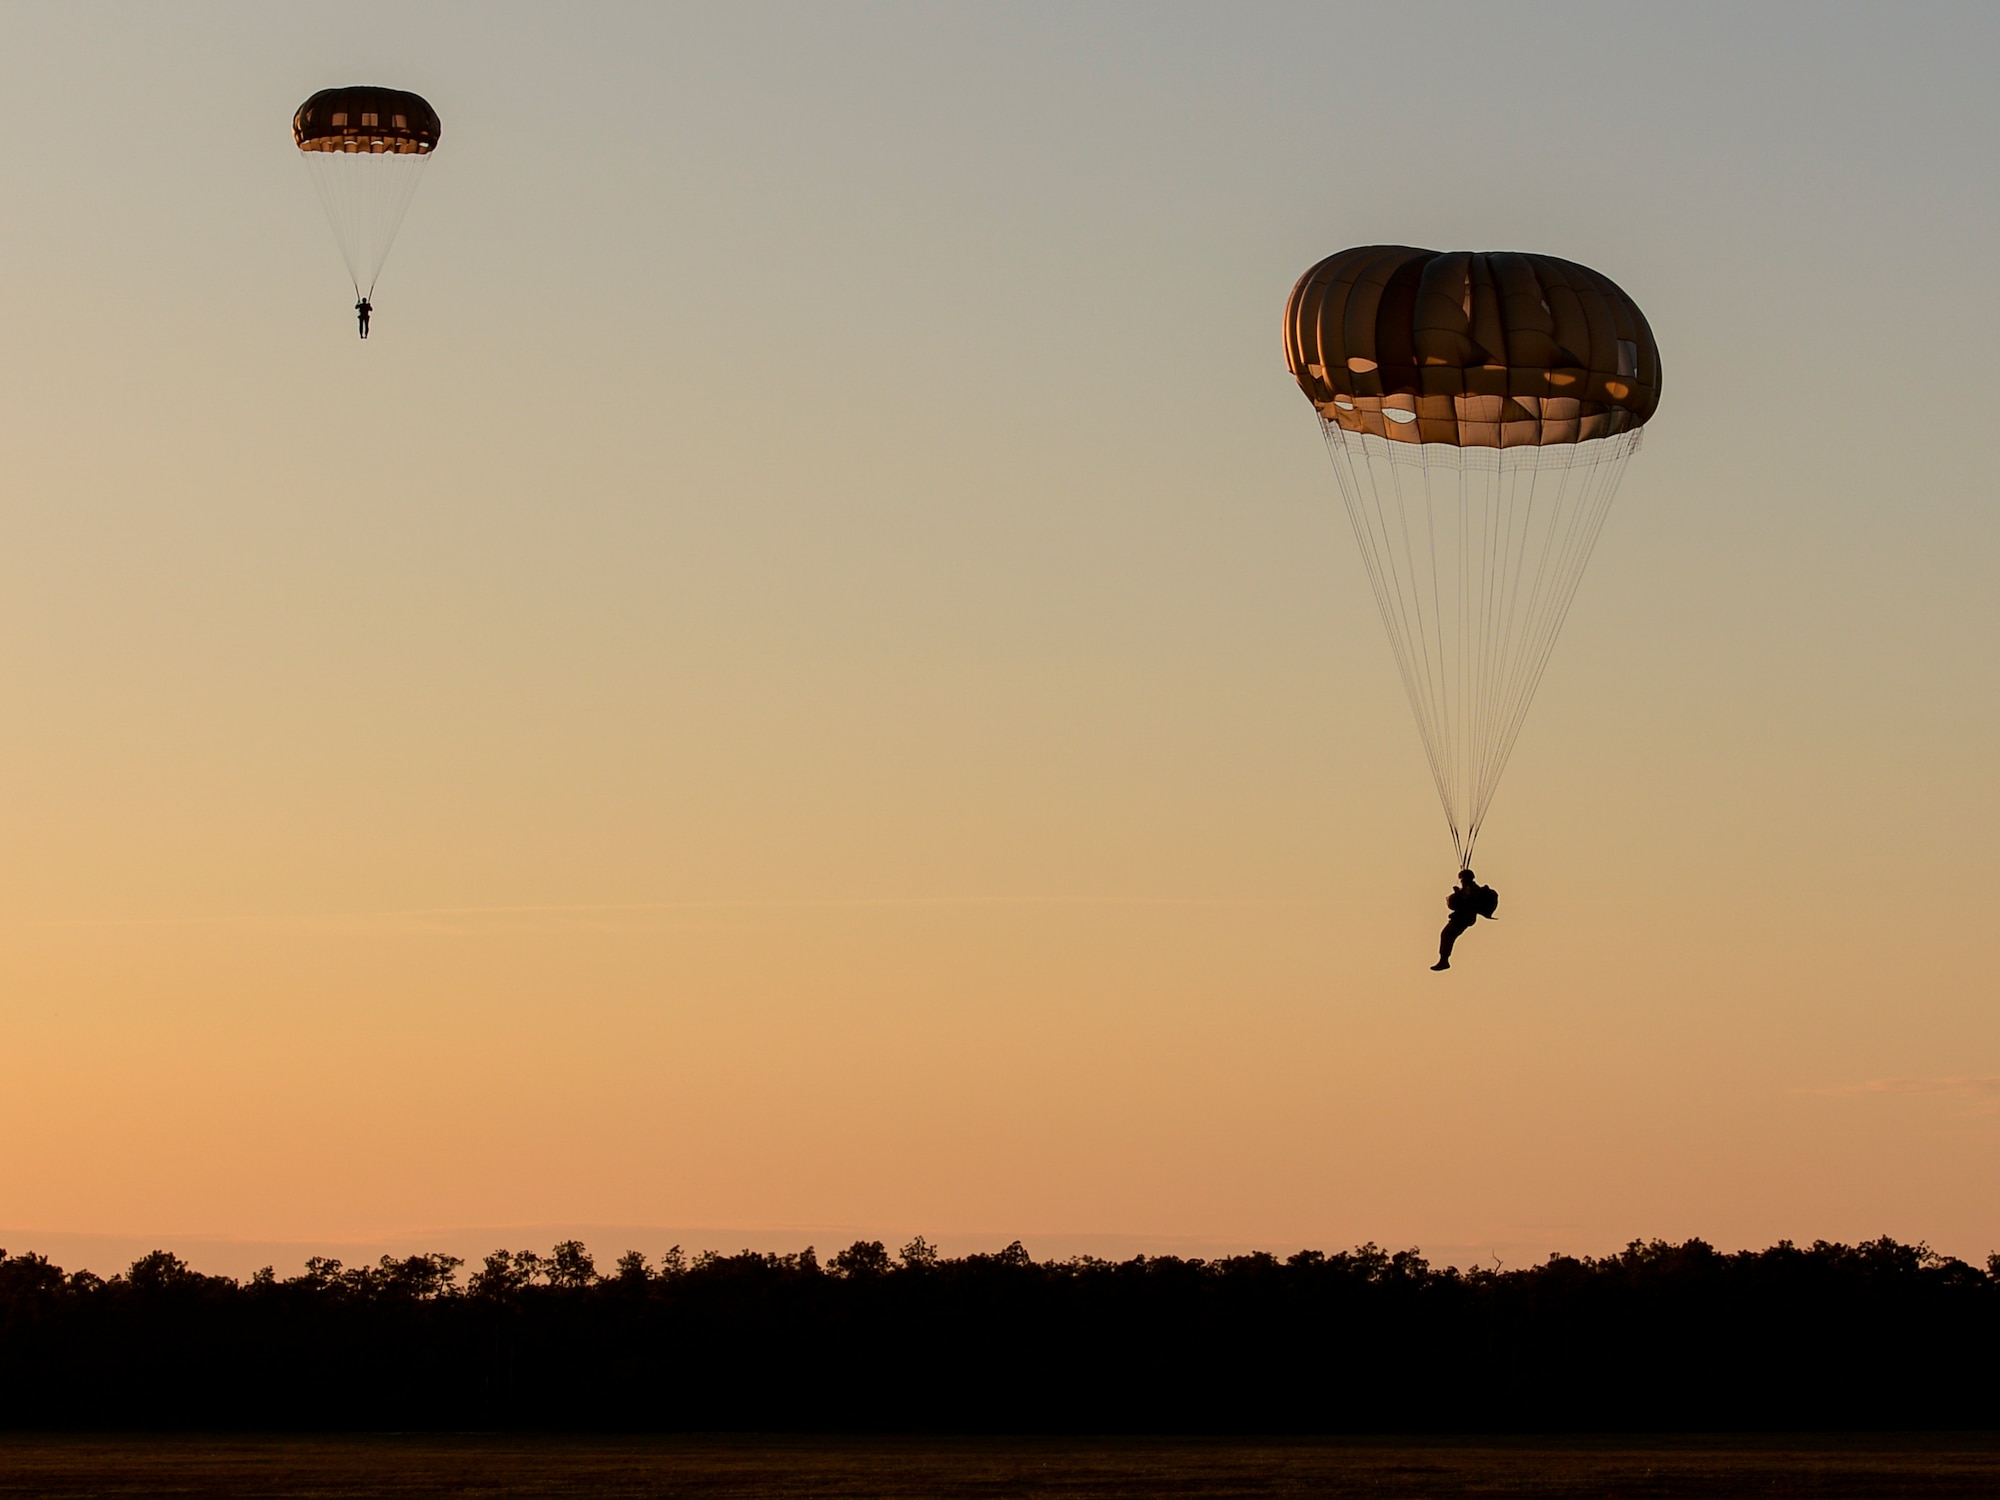 U.S. Army Soldiers with the 7th Special Forces Group perform static-line parachute jumps during Emerald Warrior 2015 at Eglin Air Force Base, Fla., April 21, 2015. Emerald Warrior is the Department of Defense's only irregular warfare exercise, allowing joint and combined partners to train together and prepare for real-world contingency operations. (U.S. Air Force photo by Staff Sgt. Jamal D. Sutter/Released)
